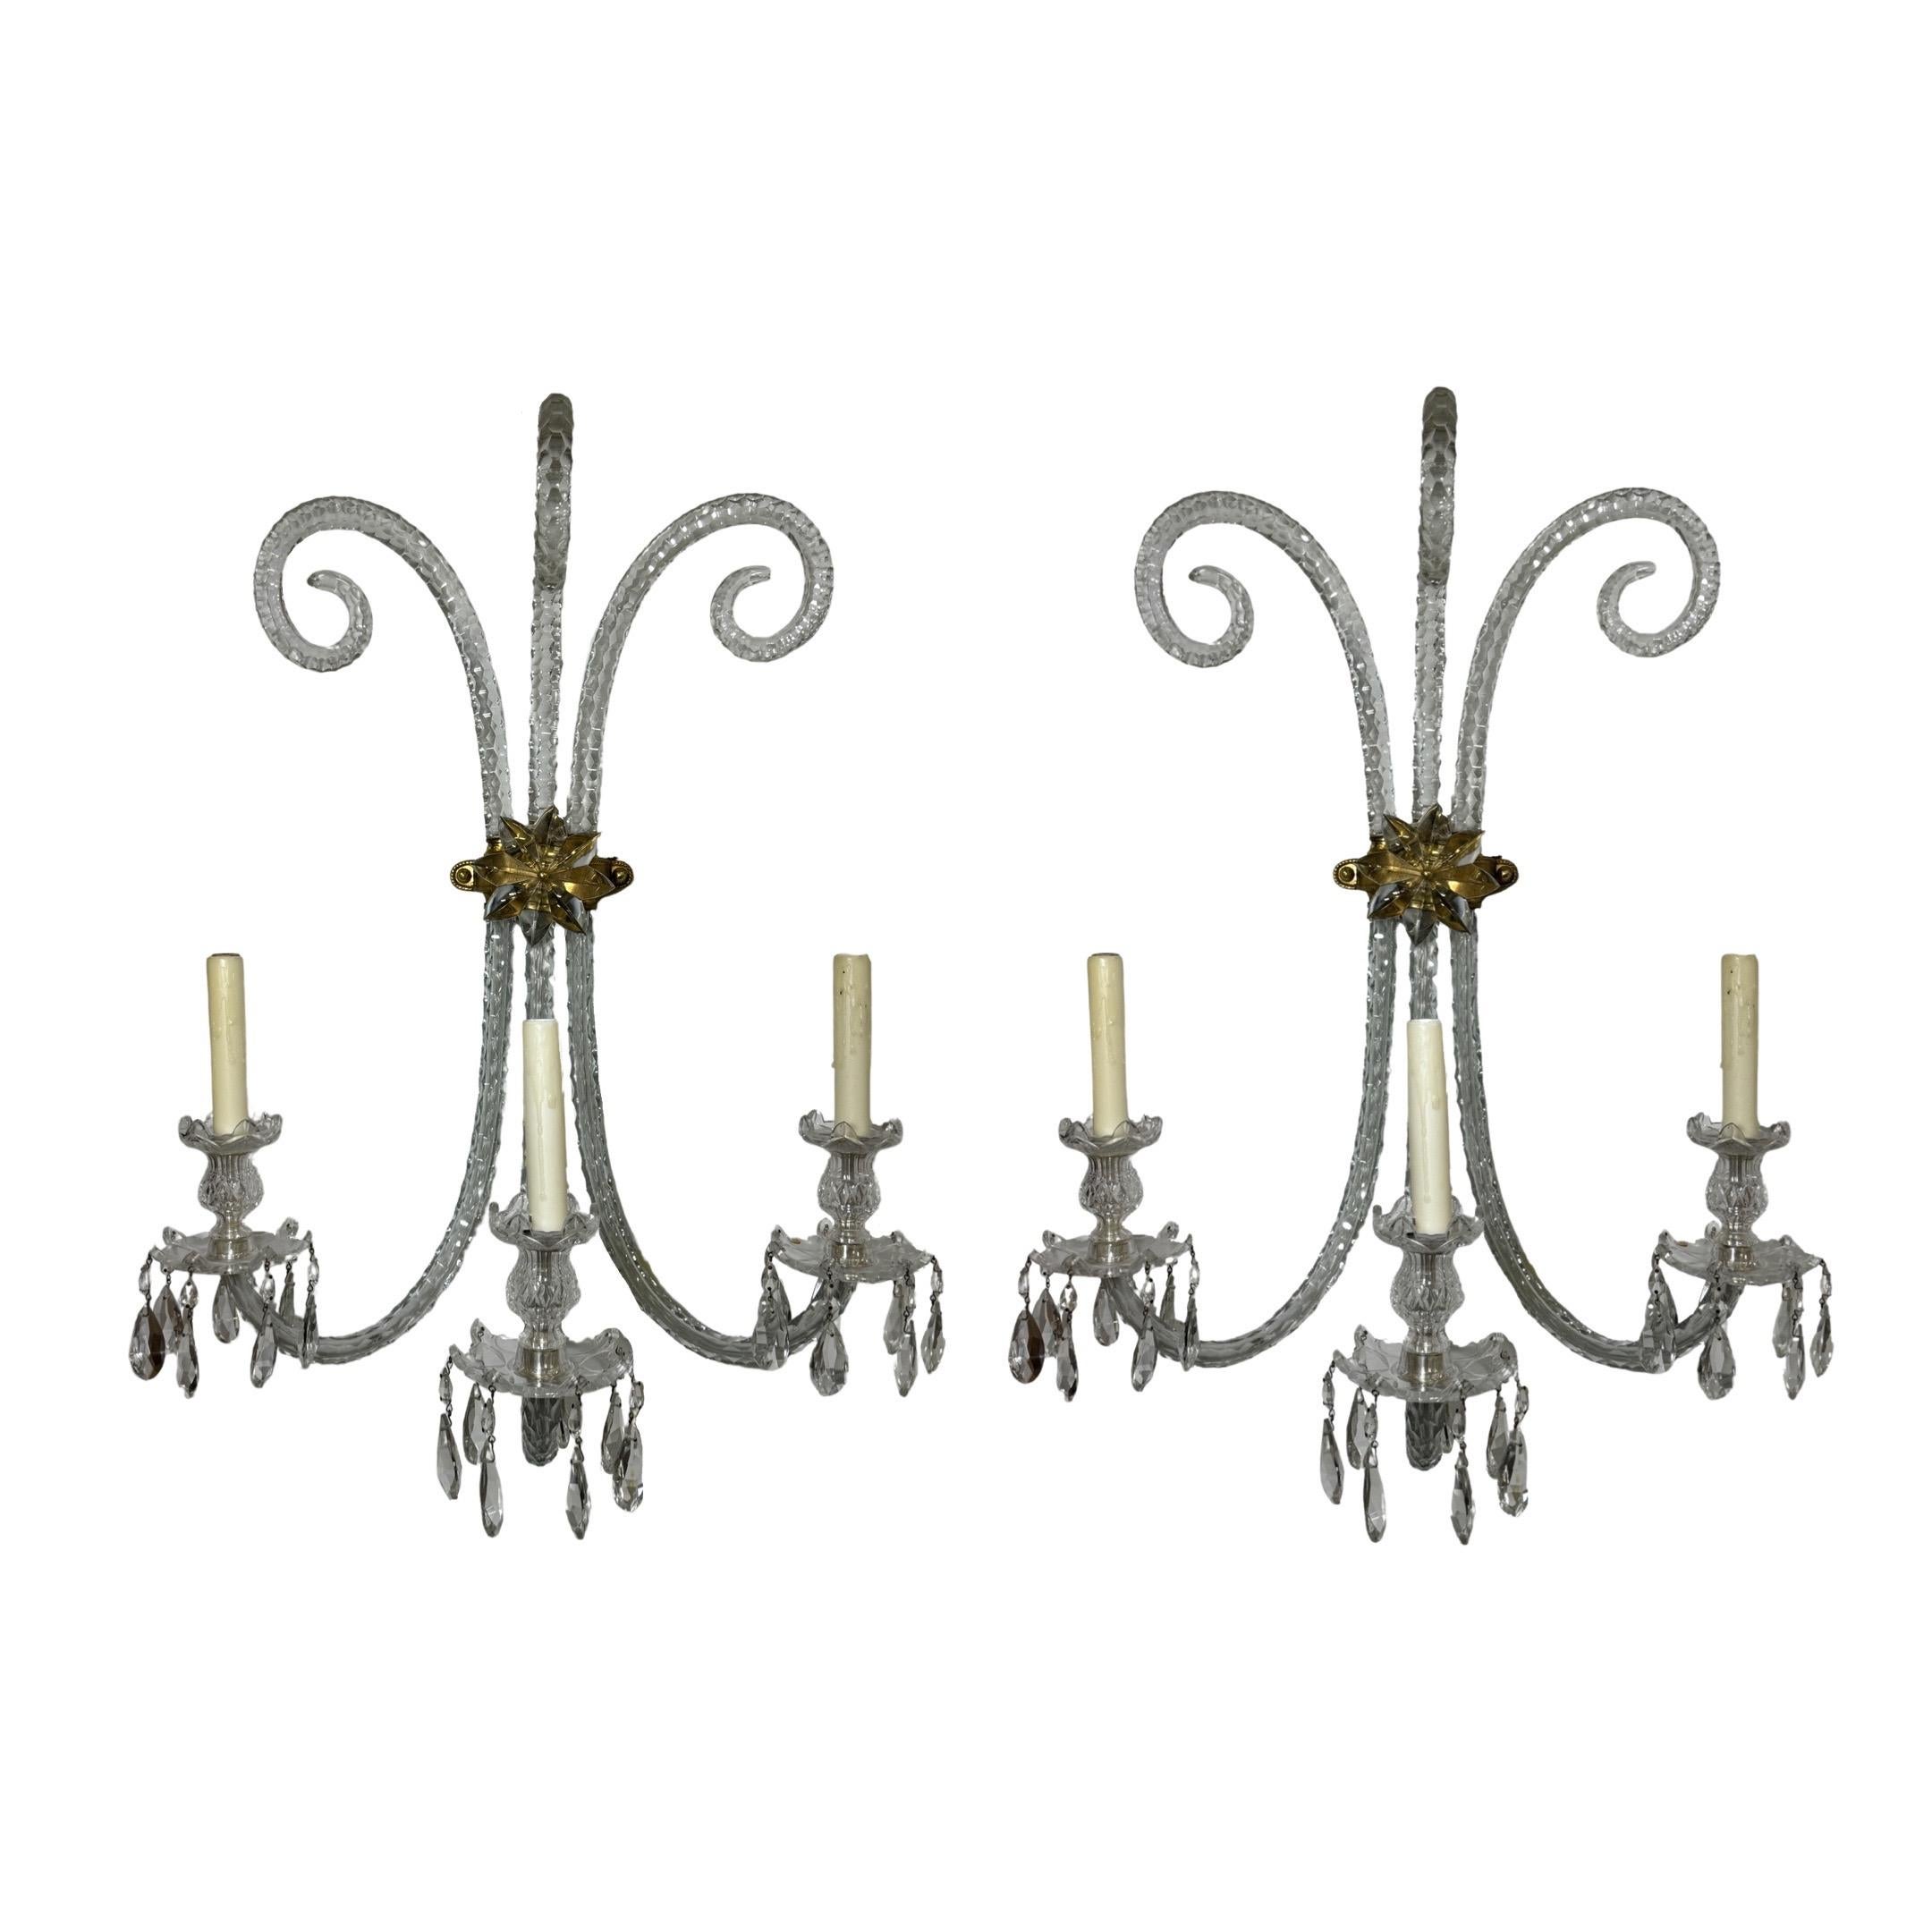 This stunning pair of Baccarat crystal wall sconces will make a beautiful addition to any home. Expertly handcrafted in Italy in the 19th century, these light chandeliers feature baccarat crystal and bronze hardware. Enjoy the classic beauty of this